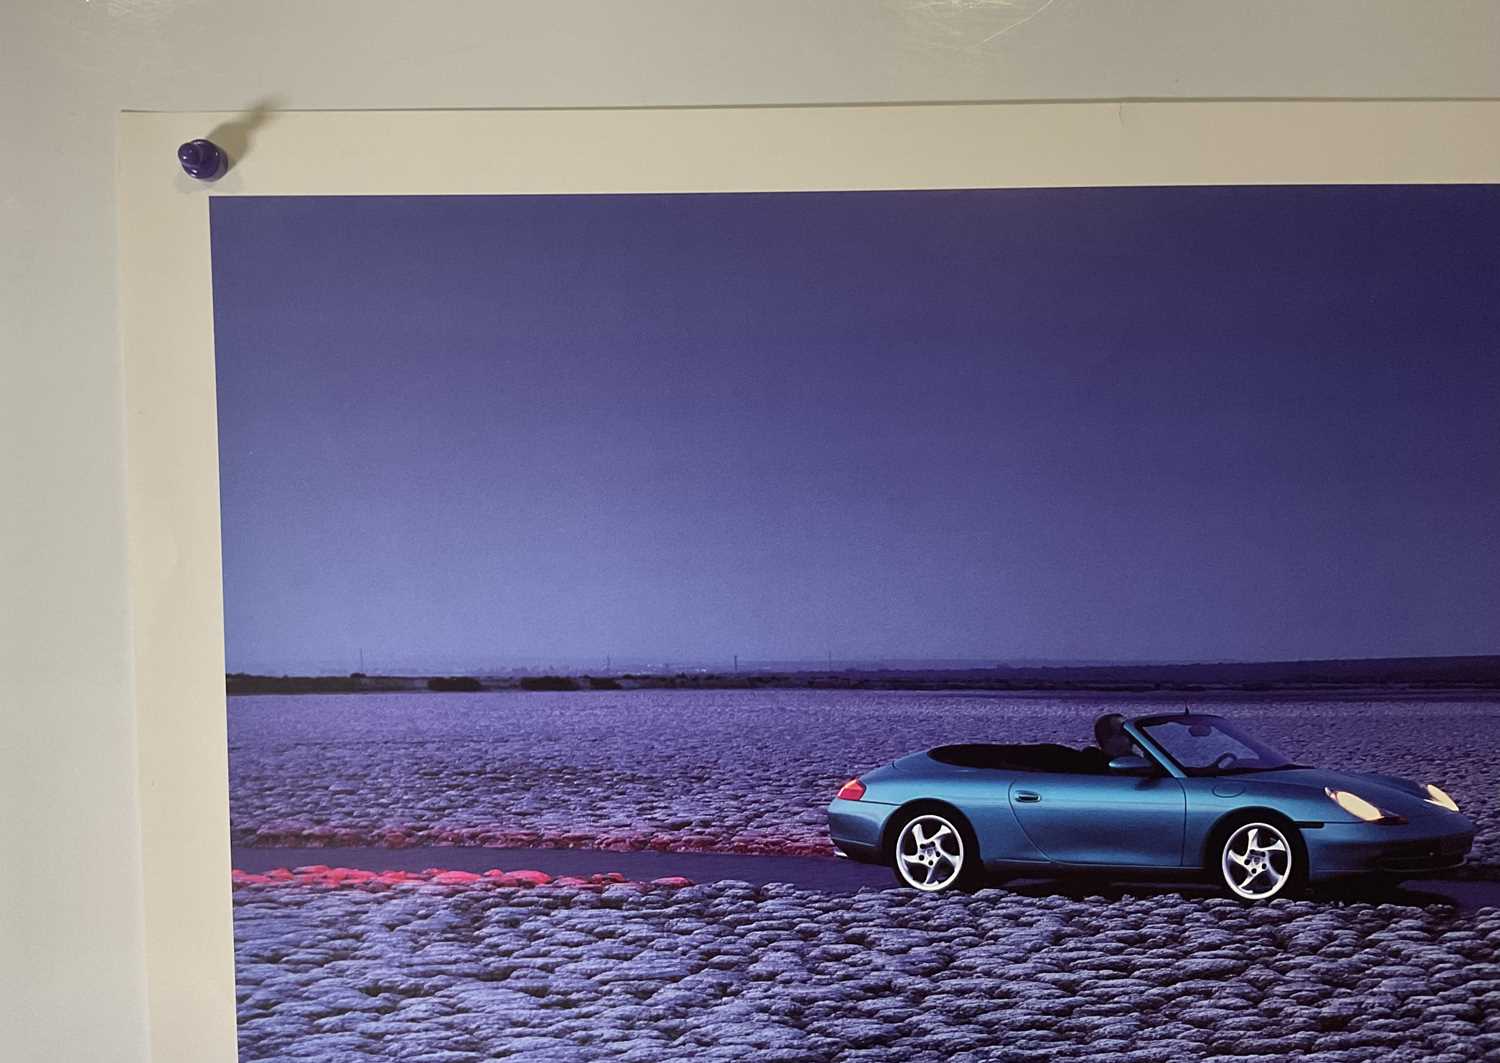 Porsche 911 Cabriolet official Porsche Poster from a car dealership, c. 2000, 30" x 40", rolled. - Image 2 of 5